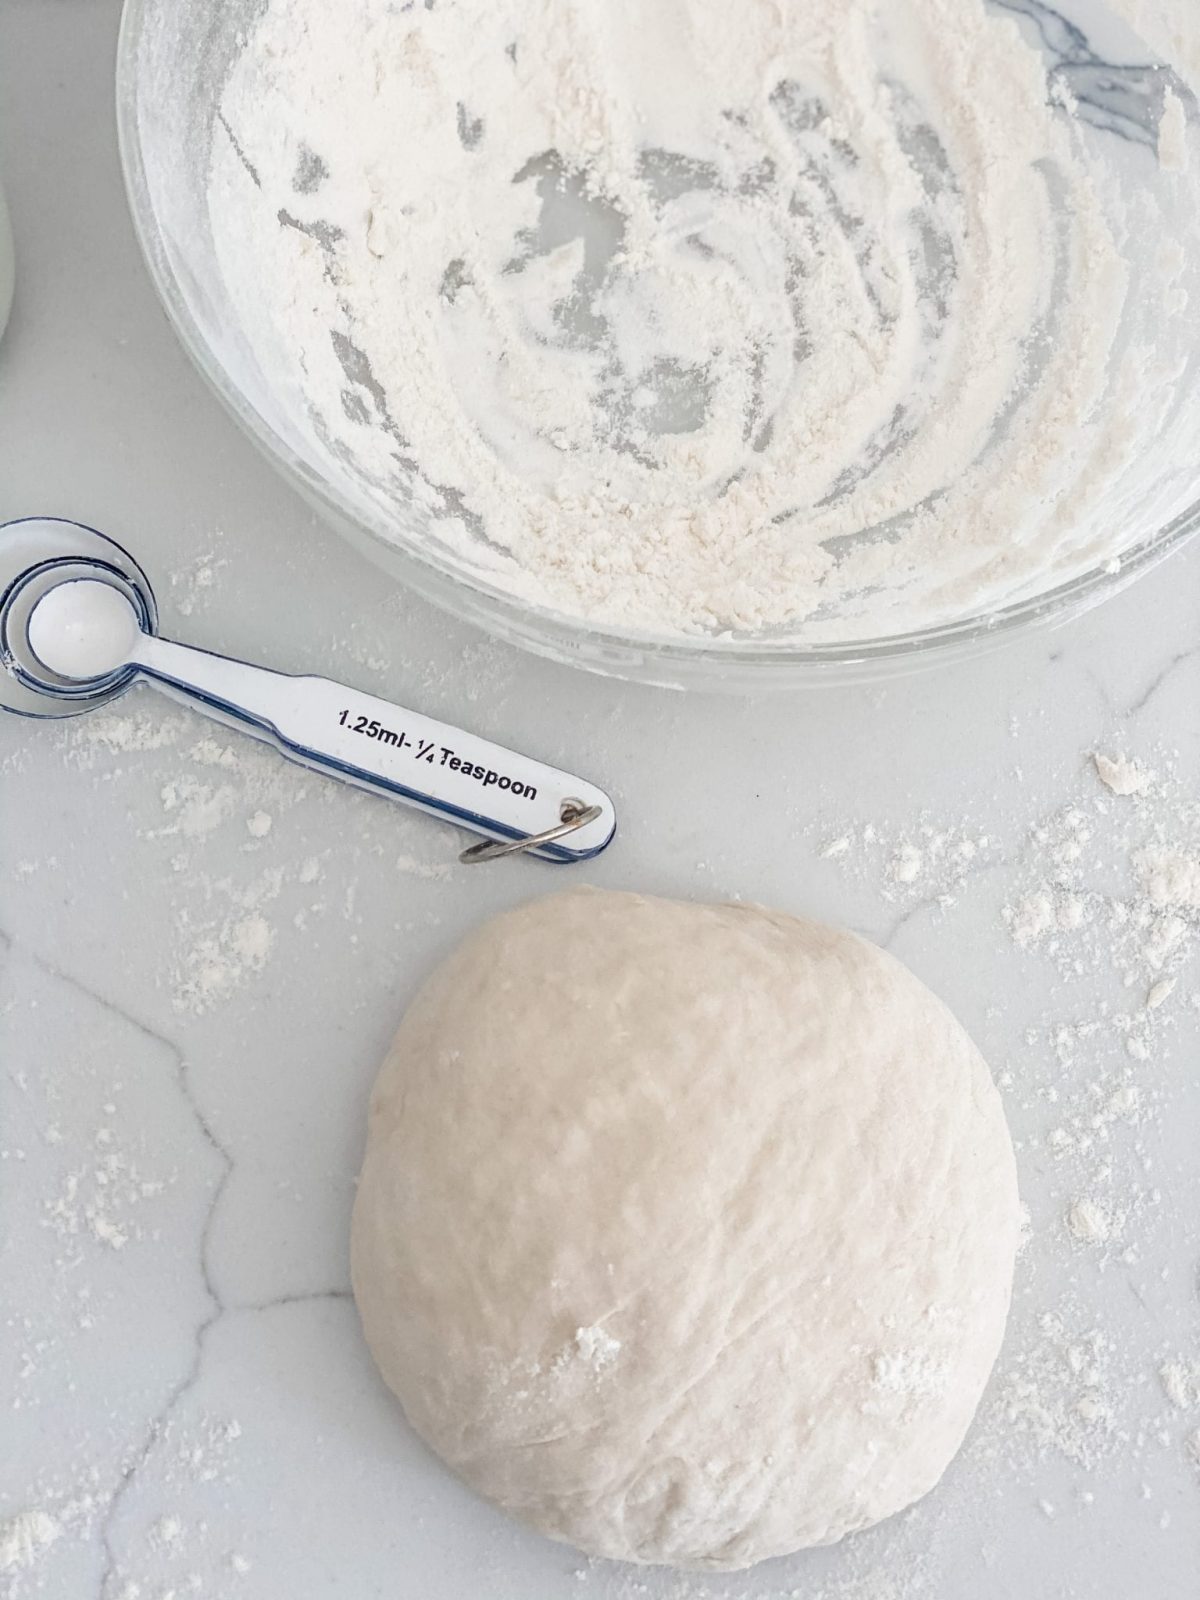 Weight Watchers Quick and Easy Dough Recipe

